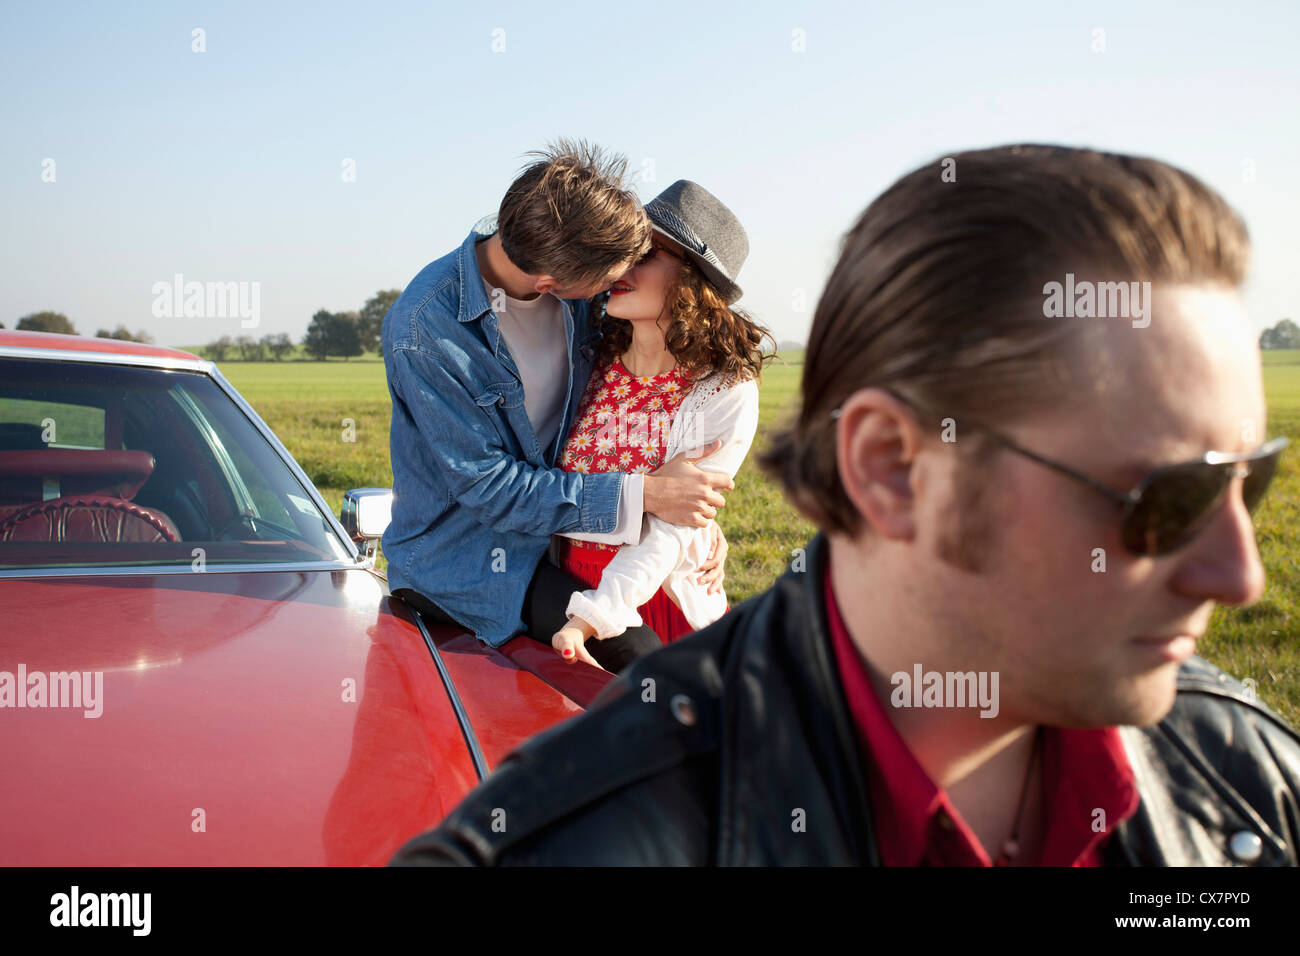 A rockabilly couple kissing while leaning on a vintage car, man in foreground Stock Photo